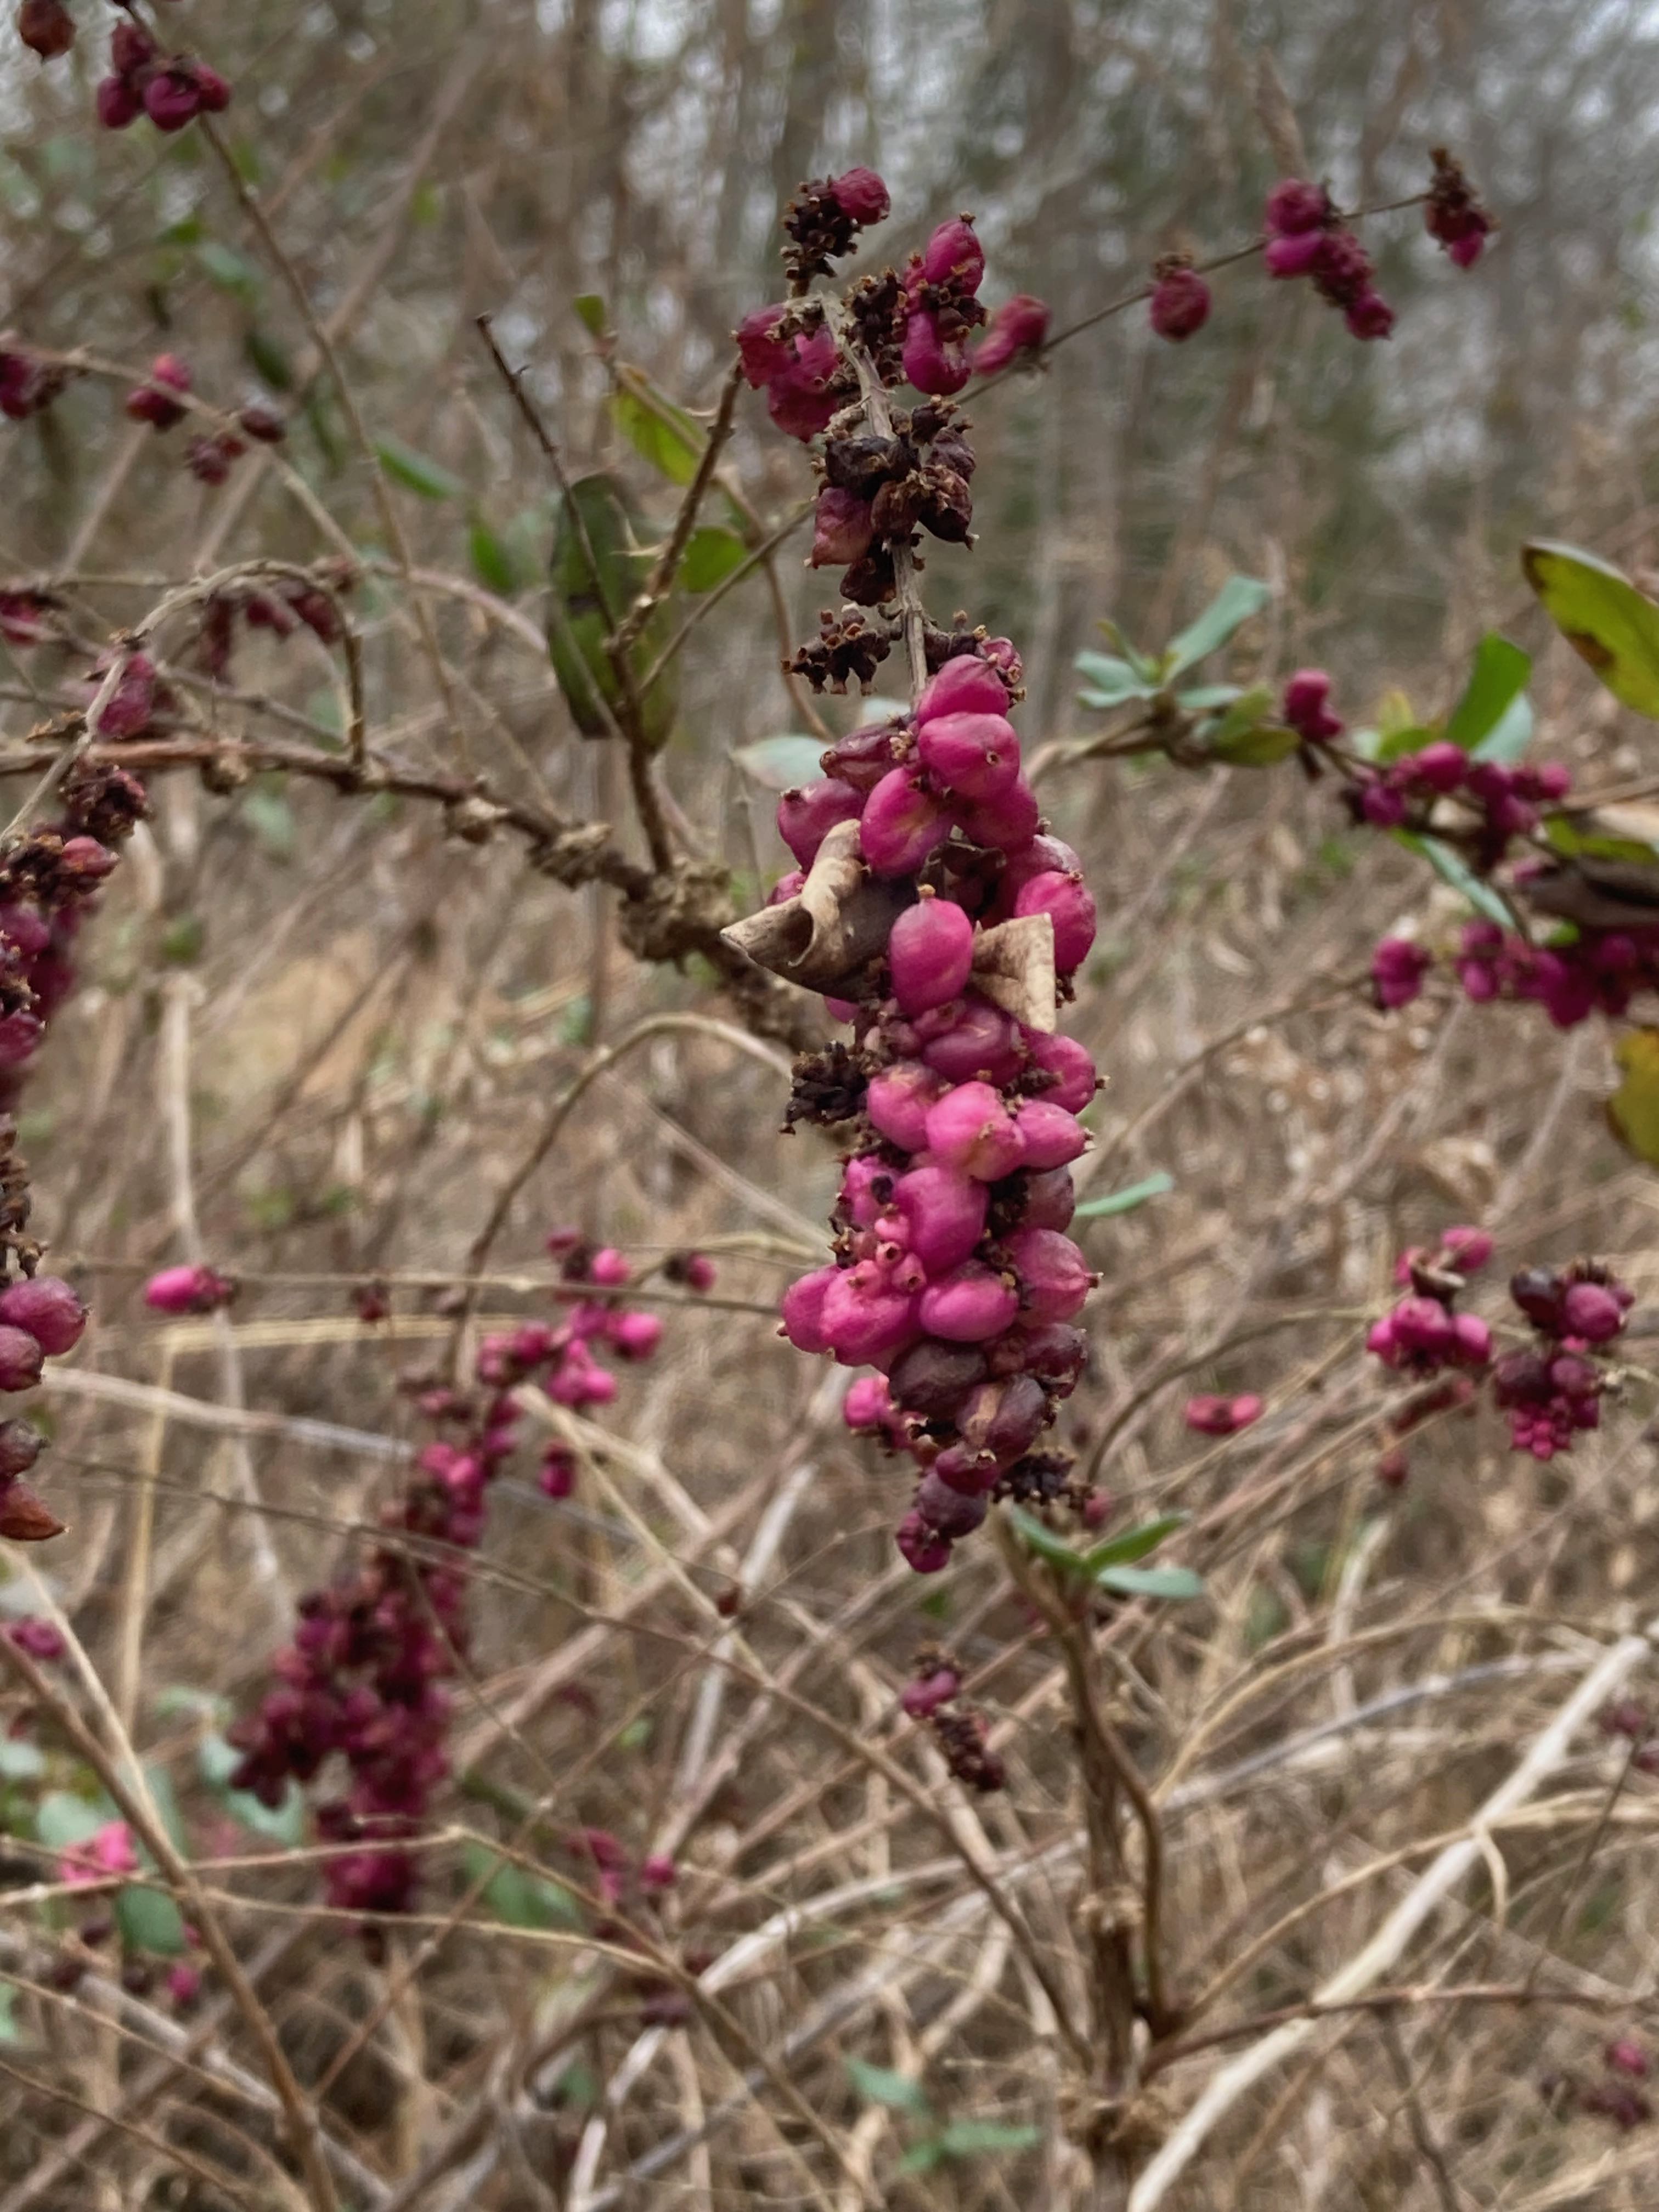 The Scientific Name is Symphoricarpos orbiculatus. You will likely hear them called Coralberry, Buckbrush, Indian Currant, Red Snowberry. This picture shows the The fruit remains on the plant through winter. The photo was taken in early January. of Symphoricarpos orbiculatus